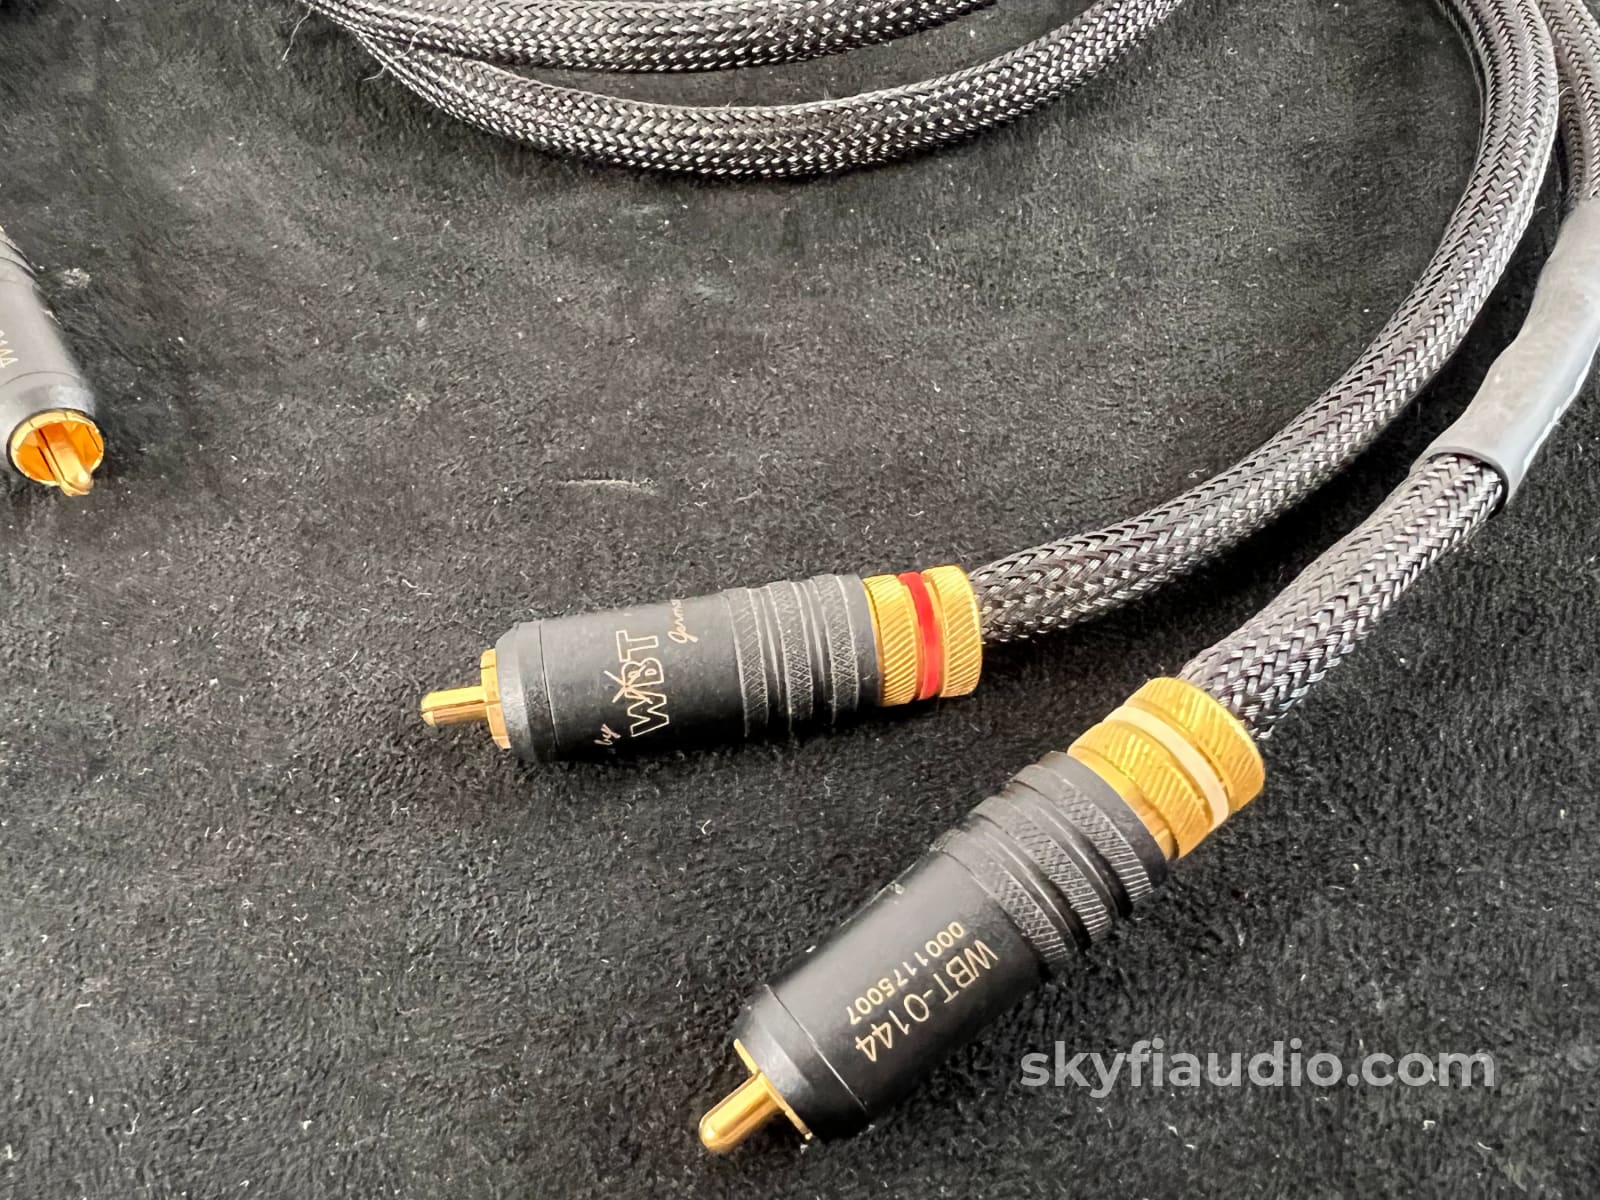 Kimber Kable Hero Rca Interconnects (Pair) With German-Made Wbt Connectors - 1 Meter Cables